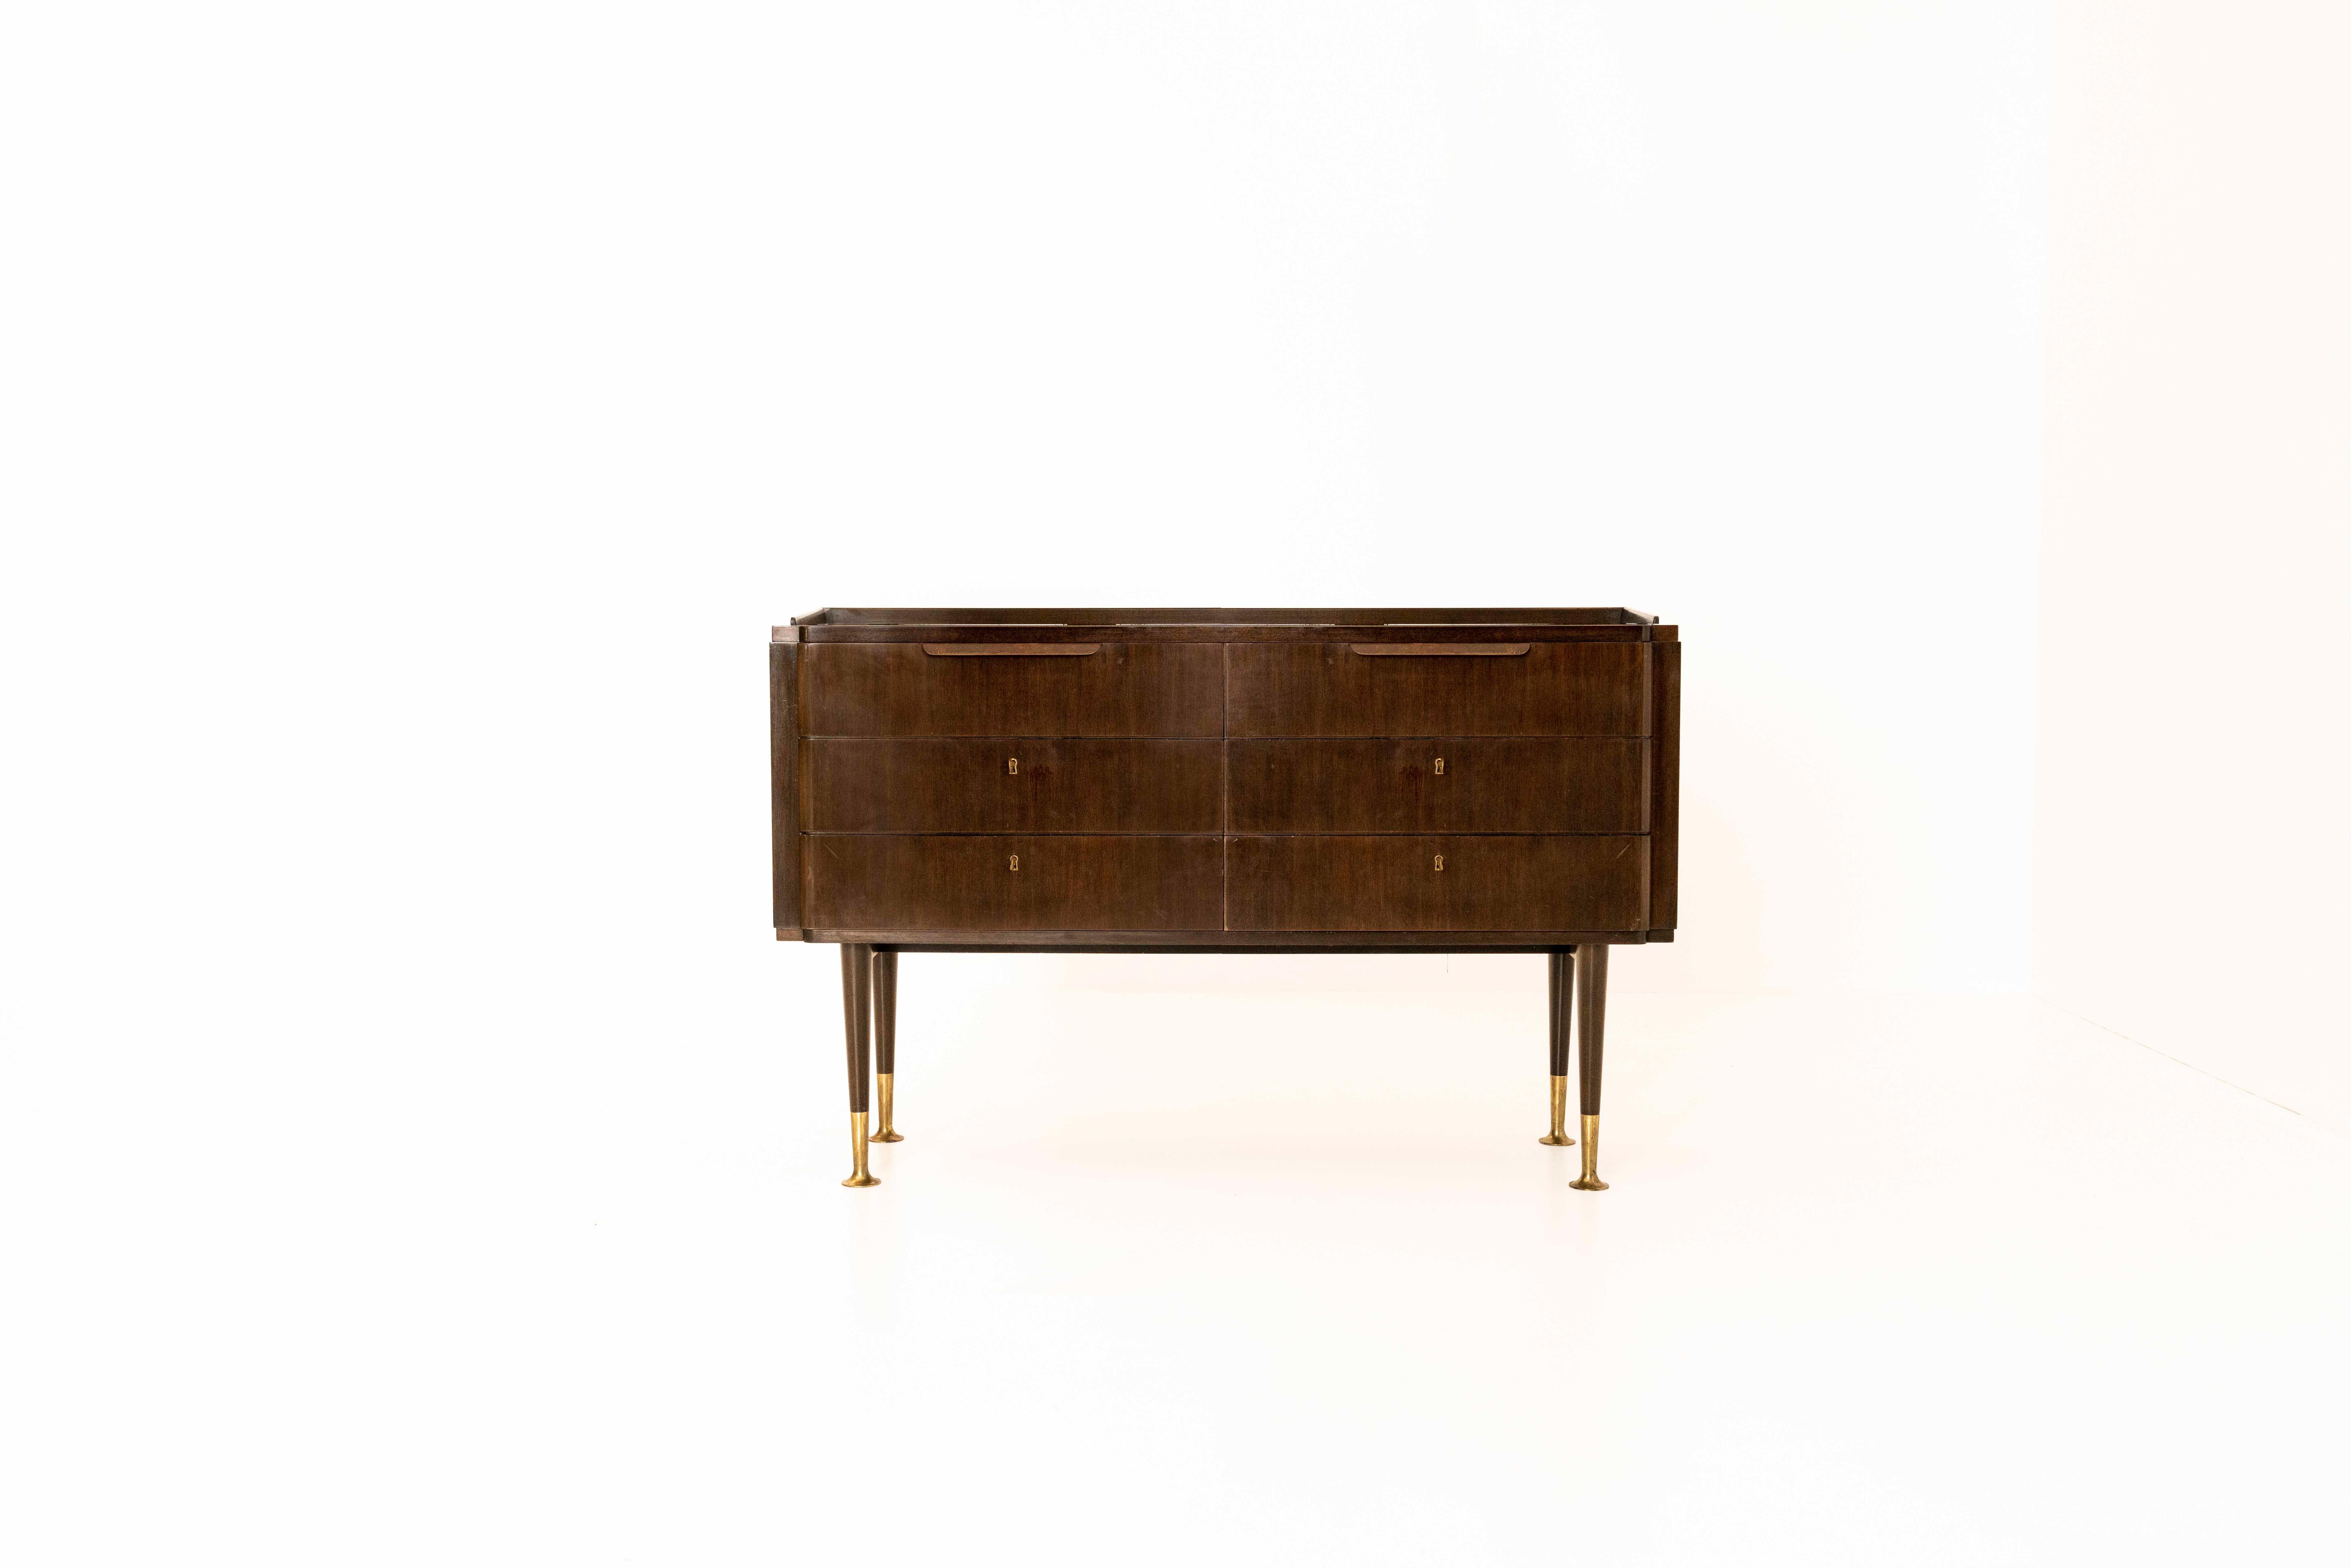 Nico chest of drawers or cabinet by Bruno Paul for WK Möbel from Germany, the 1920s. This chest of drawers in rosewood has two drawers with handles and four drawers with keys. The handles are made out of brass as are the feet. It is in good